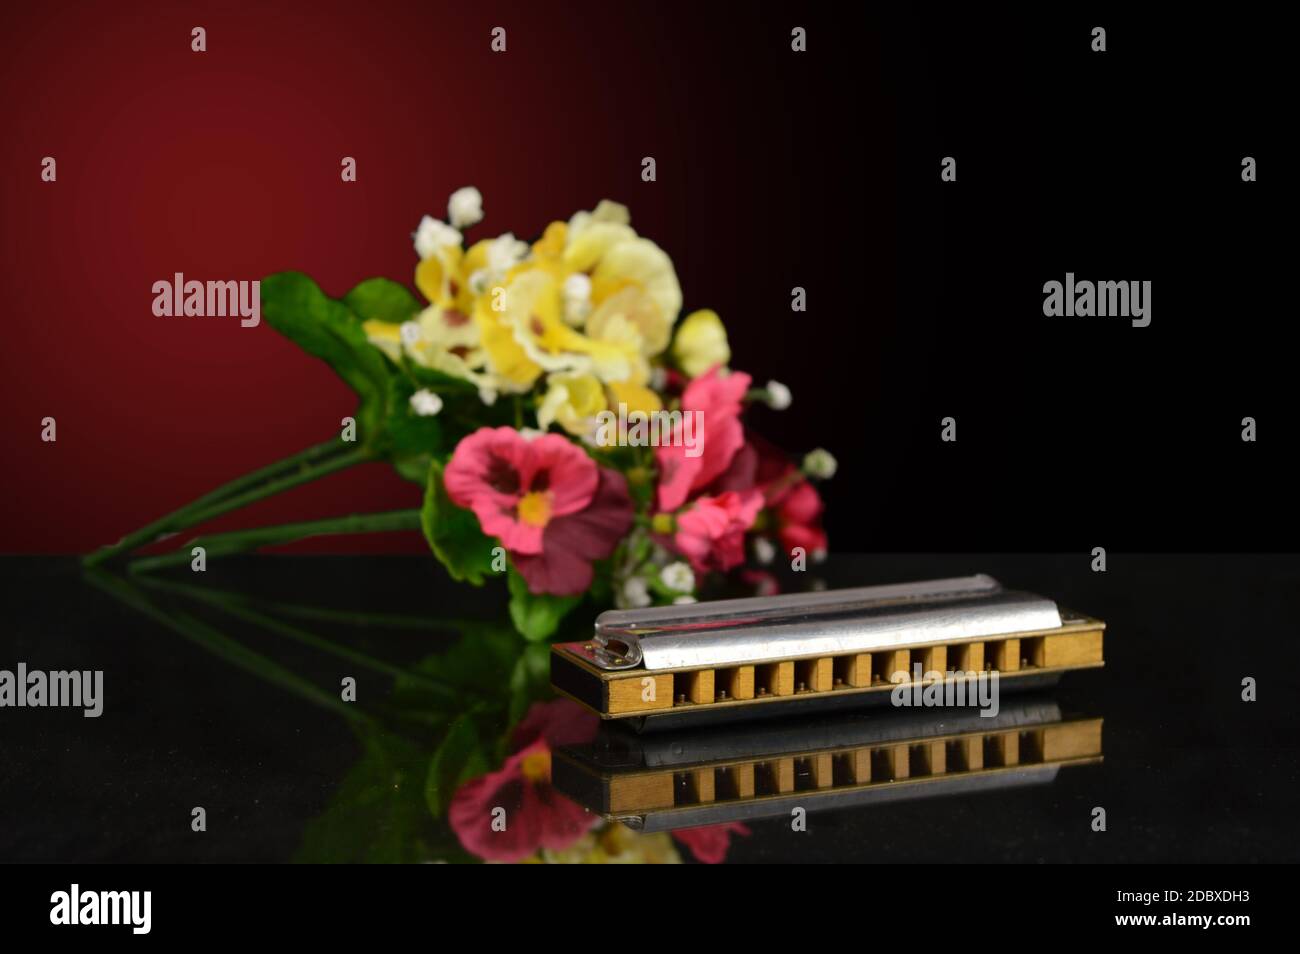 A closeup of a harmonica with a bouqet of flowers over a gradient background. Stock Photo